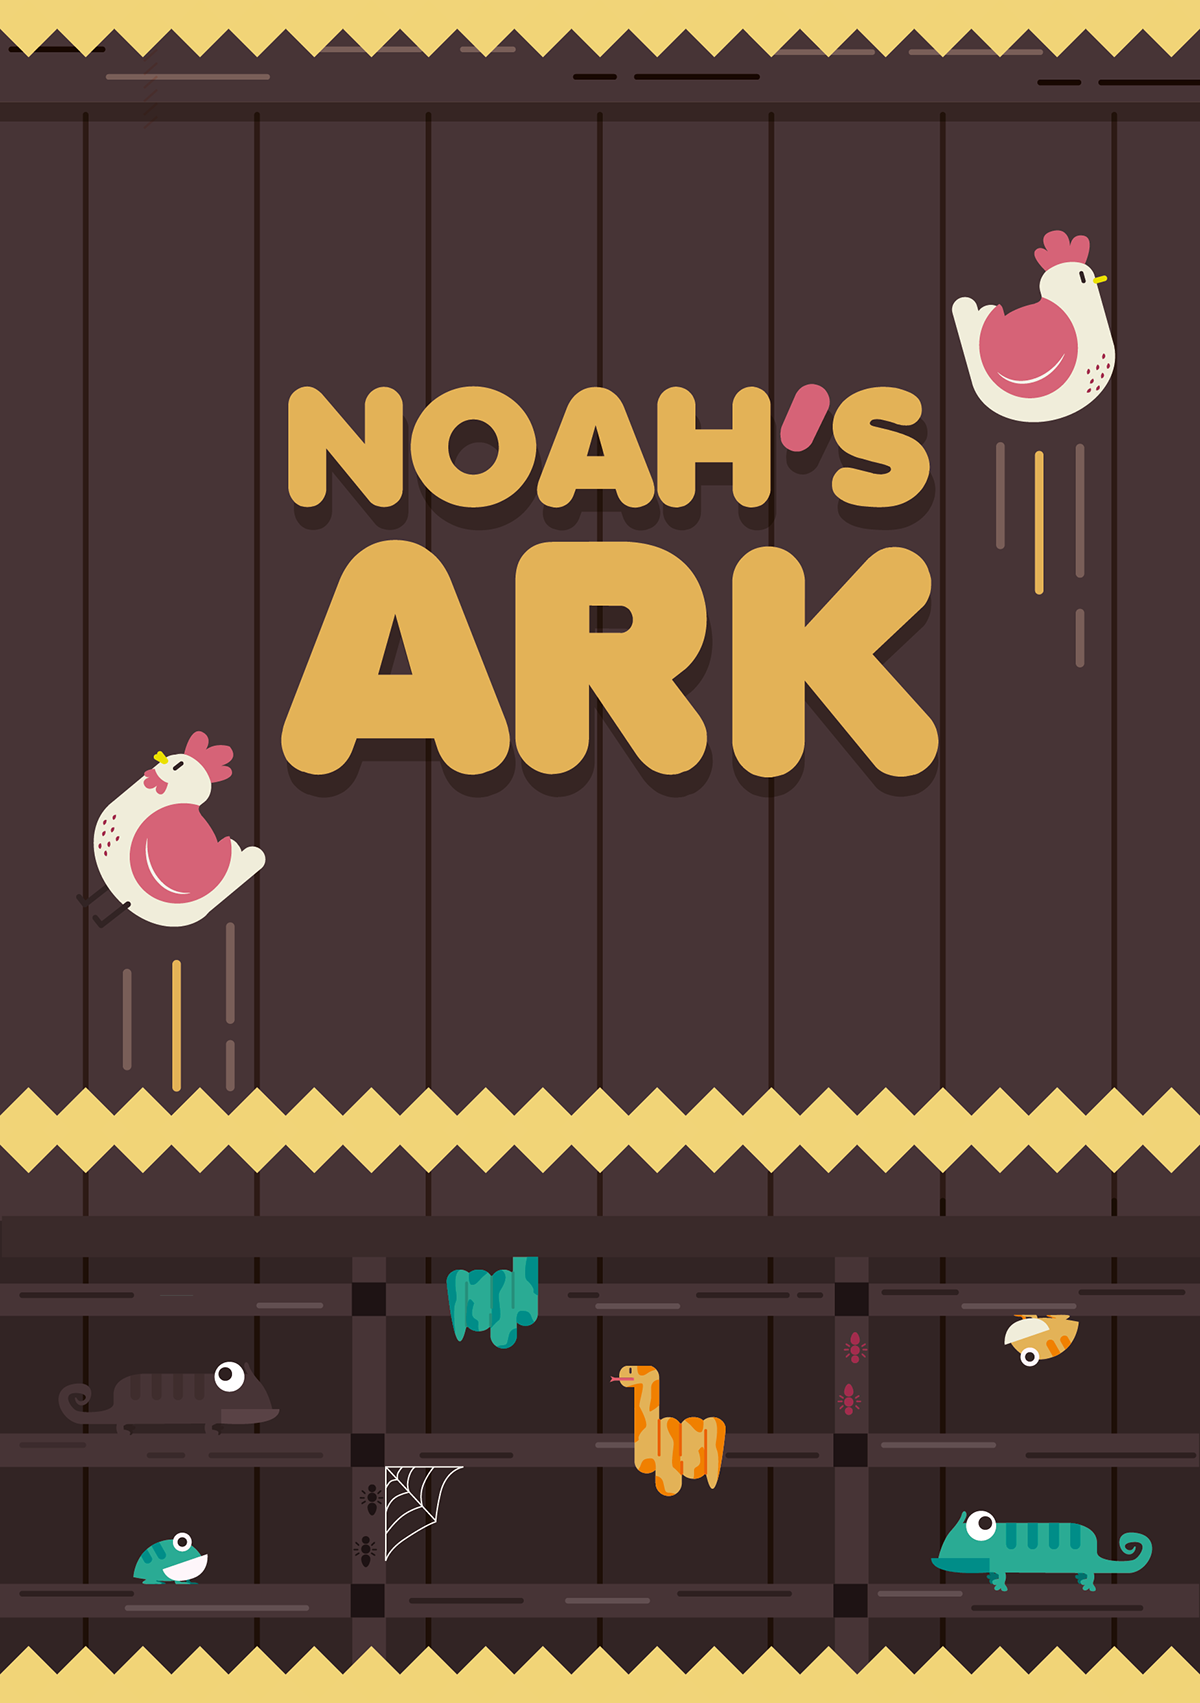 book misconception noah ark noah arc bible Illustrator clean unclean dirty Education power Project storybook scrolling book scroll